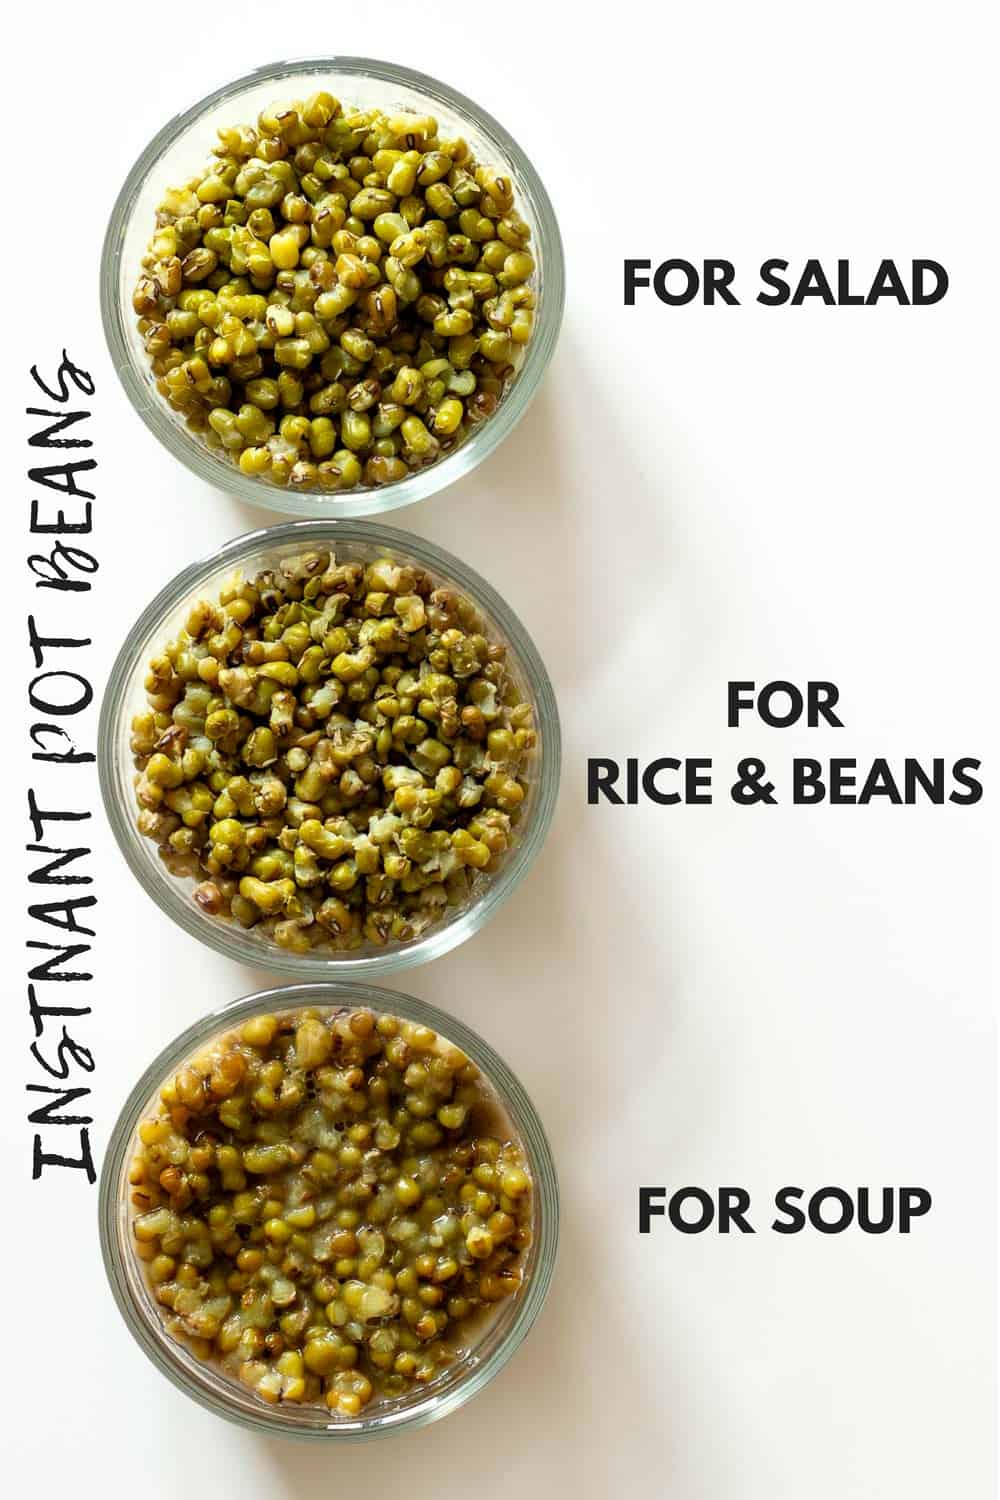 Showing consistency of Instant Pot Beans after different cooking times